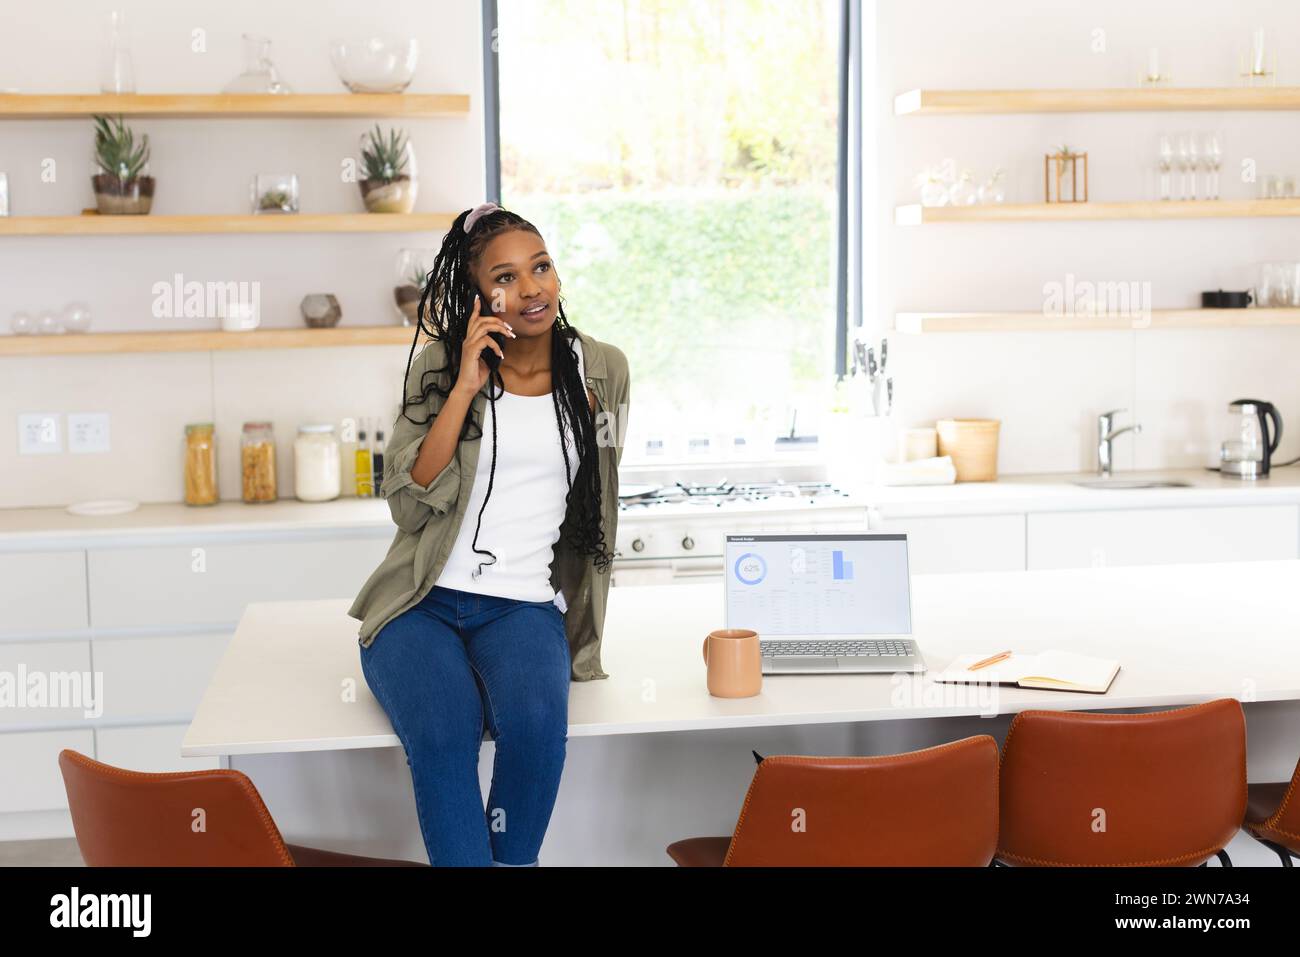 A young African American woman chats on the phone, leaning on a kitchen island with copy space Stock Photo